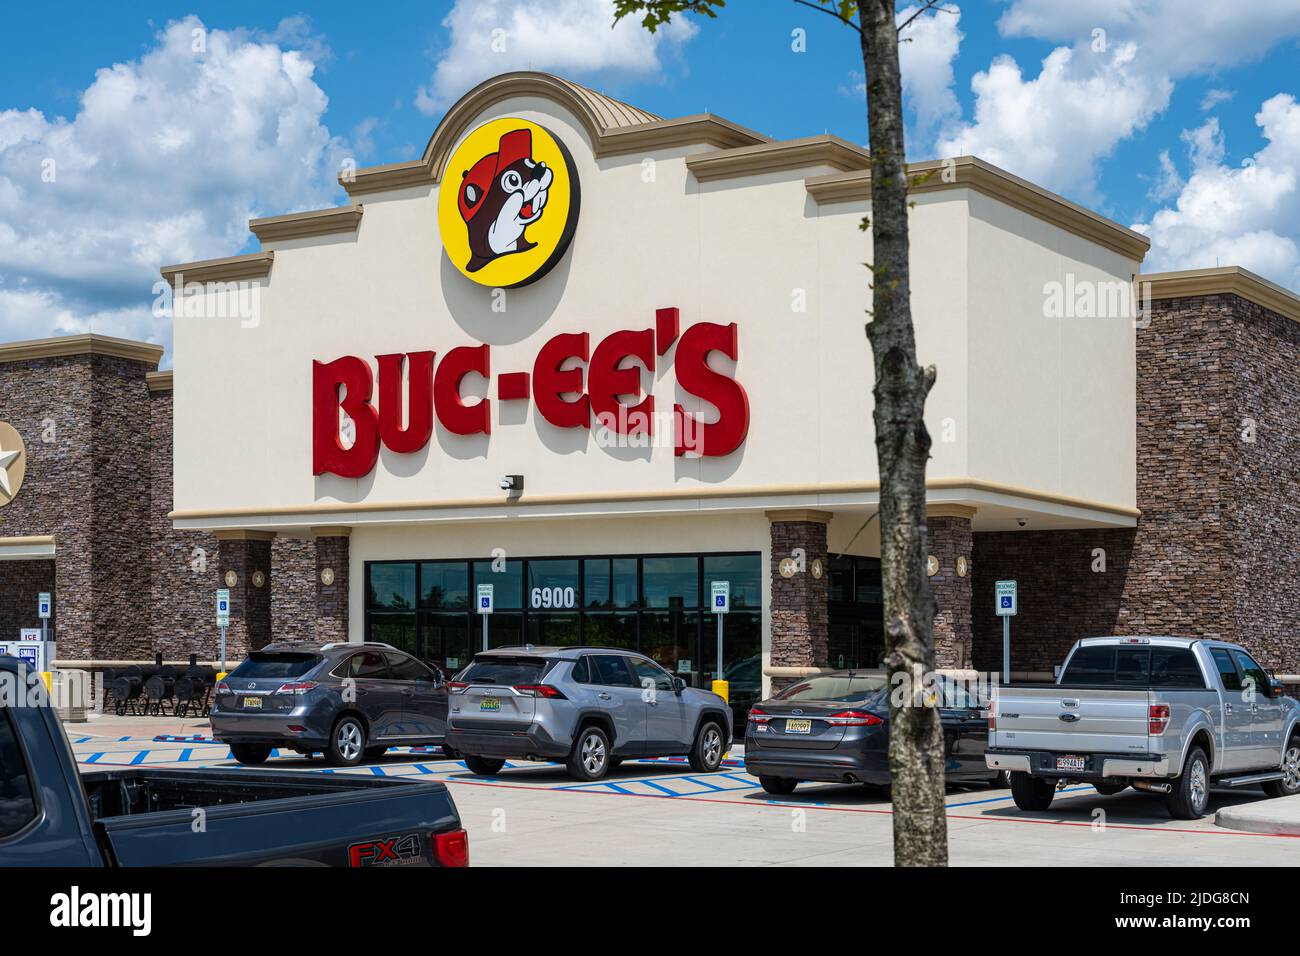 Buc-ees Texas-based and Southern-themed mega convenience store and gas station in Leeds, Alabama, just outside of Birmingham along I-20. (USA) Stock Photo